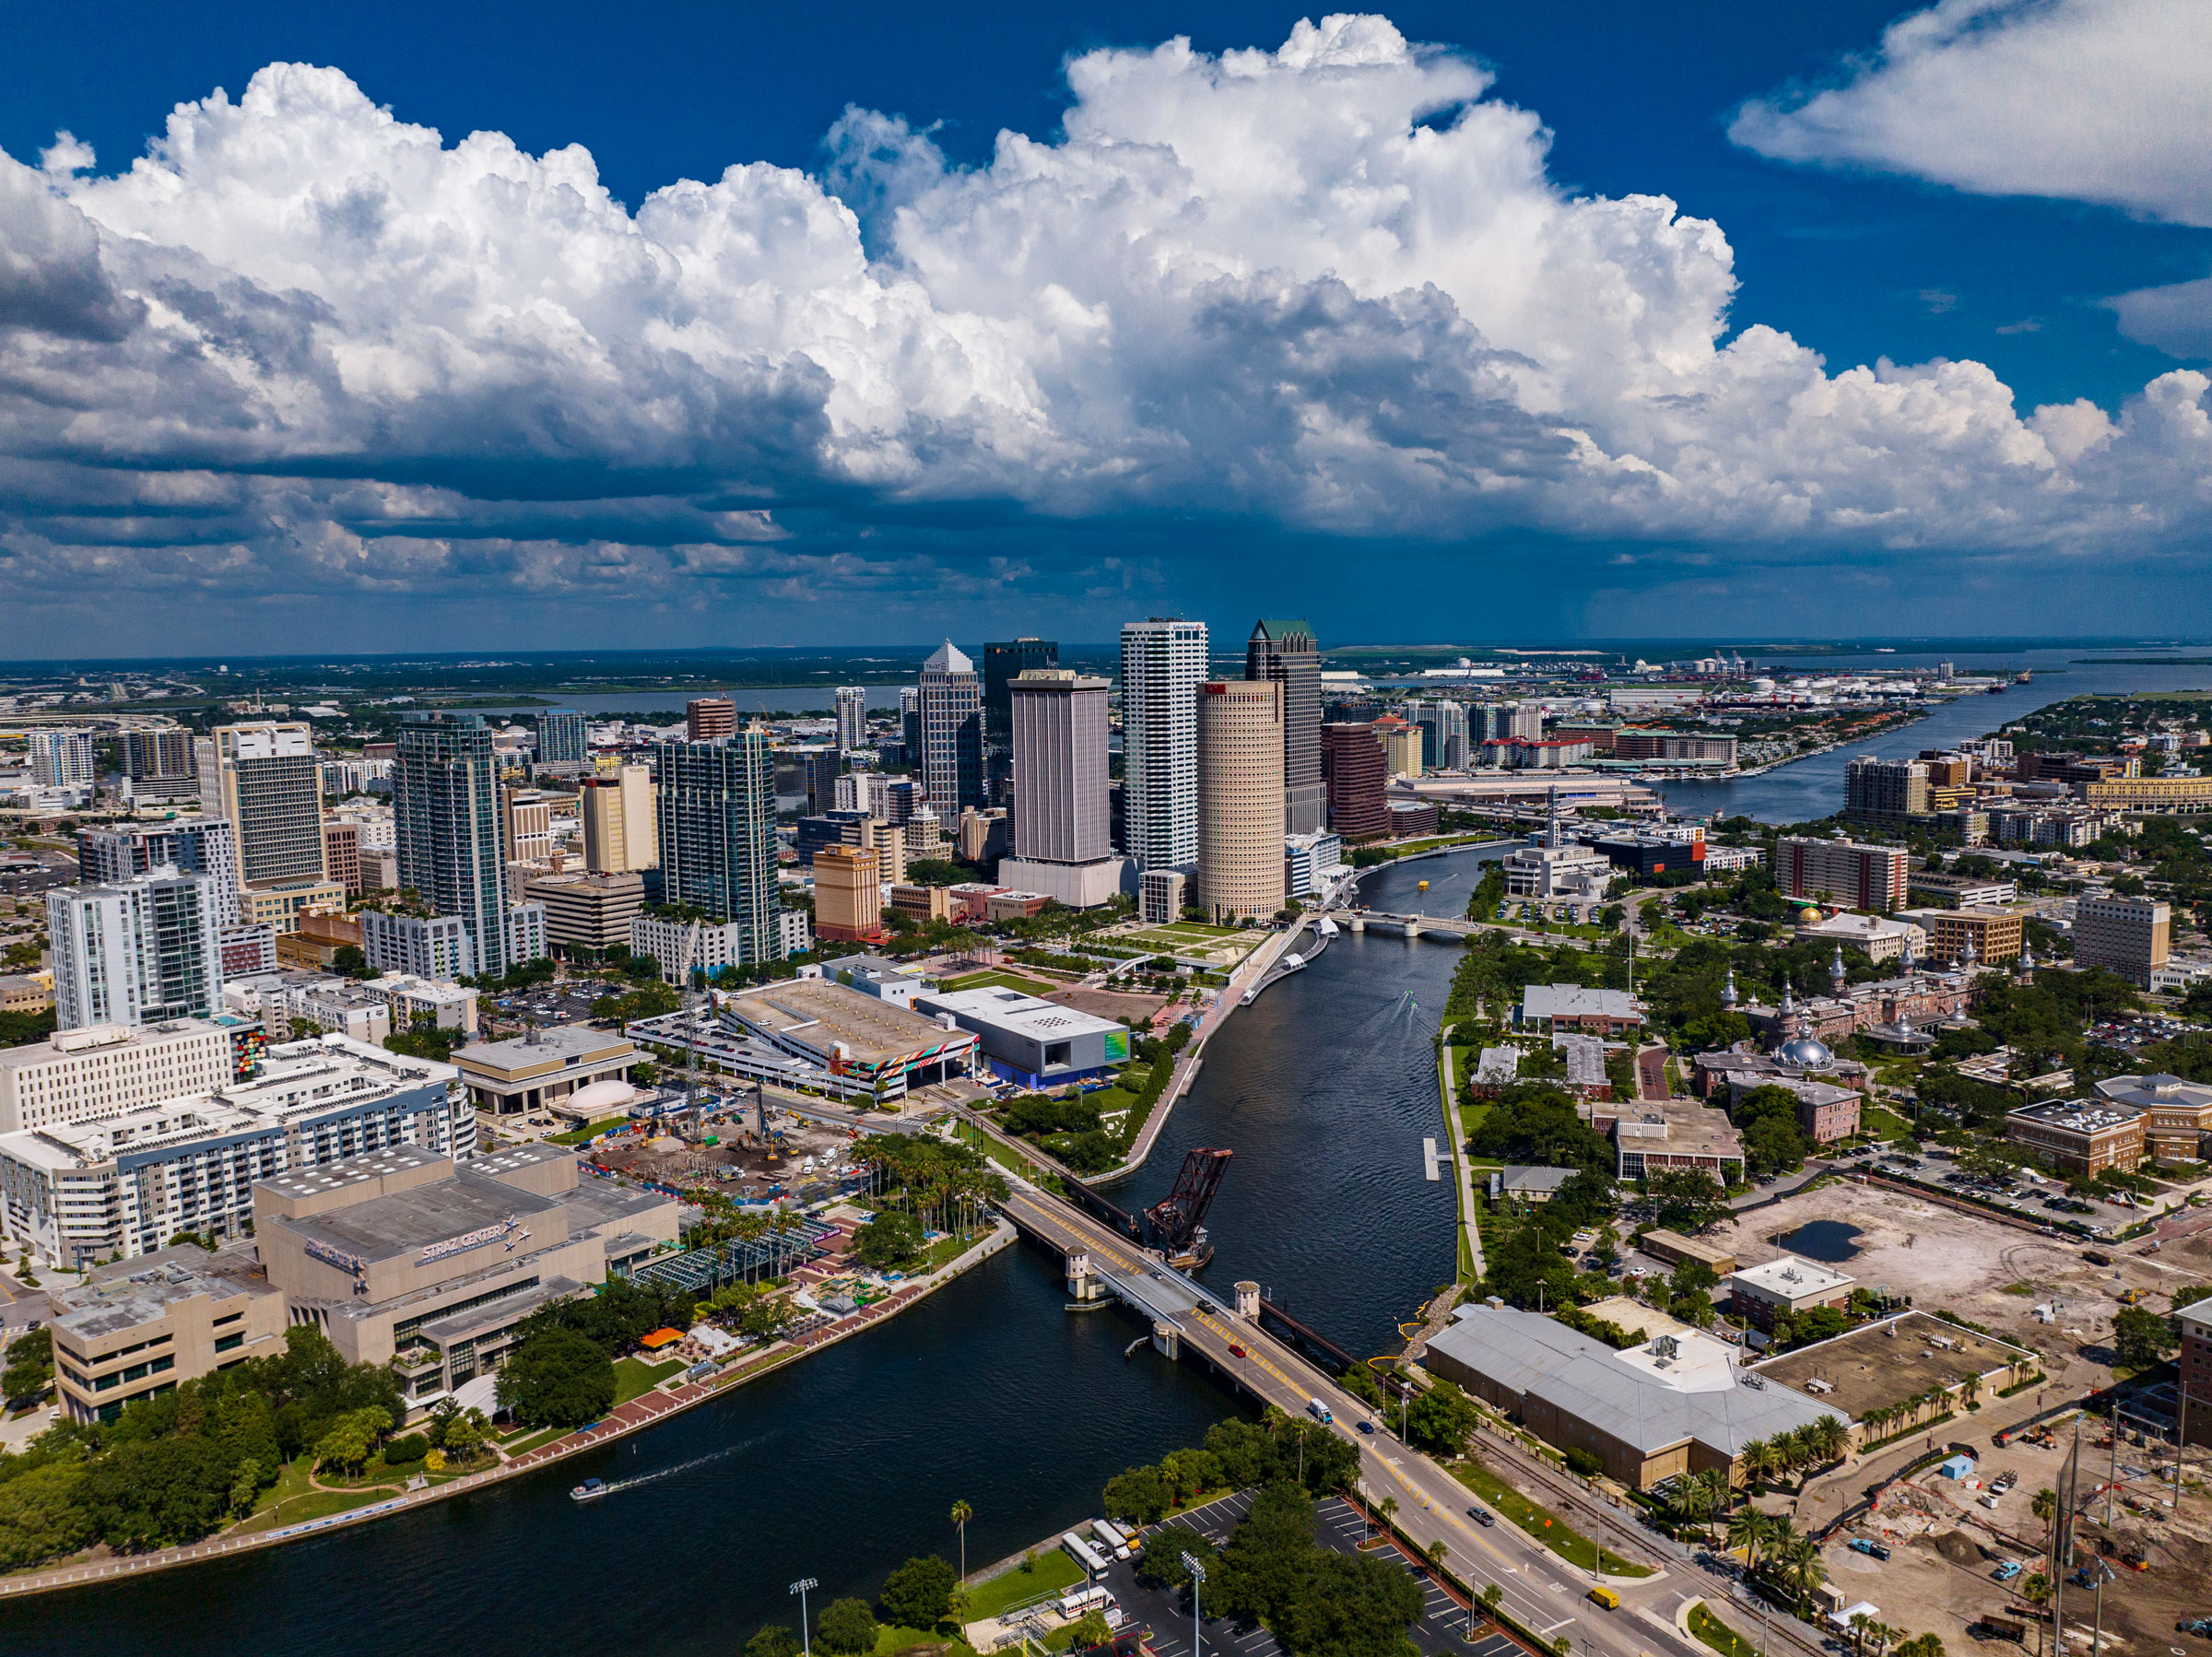 View of the Tampa Bay skyline, Florida. (Joe Sohm—Visions of America/Universal Images Group/Getty Images)